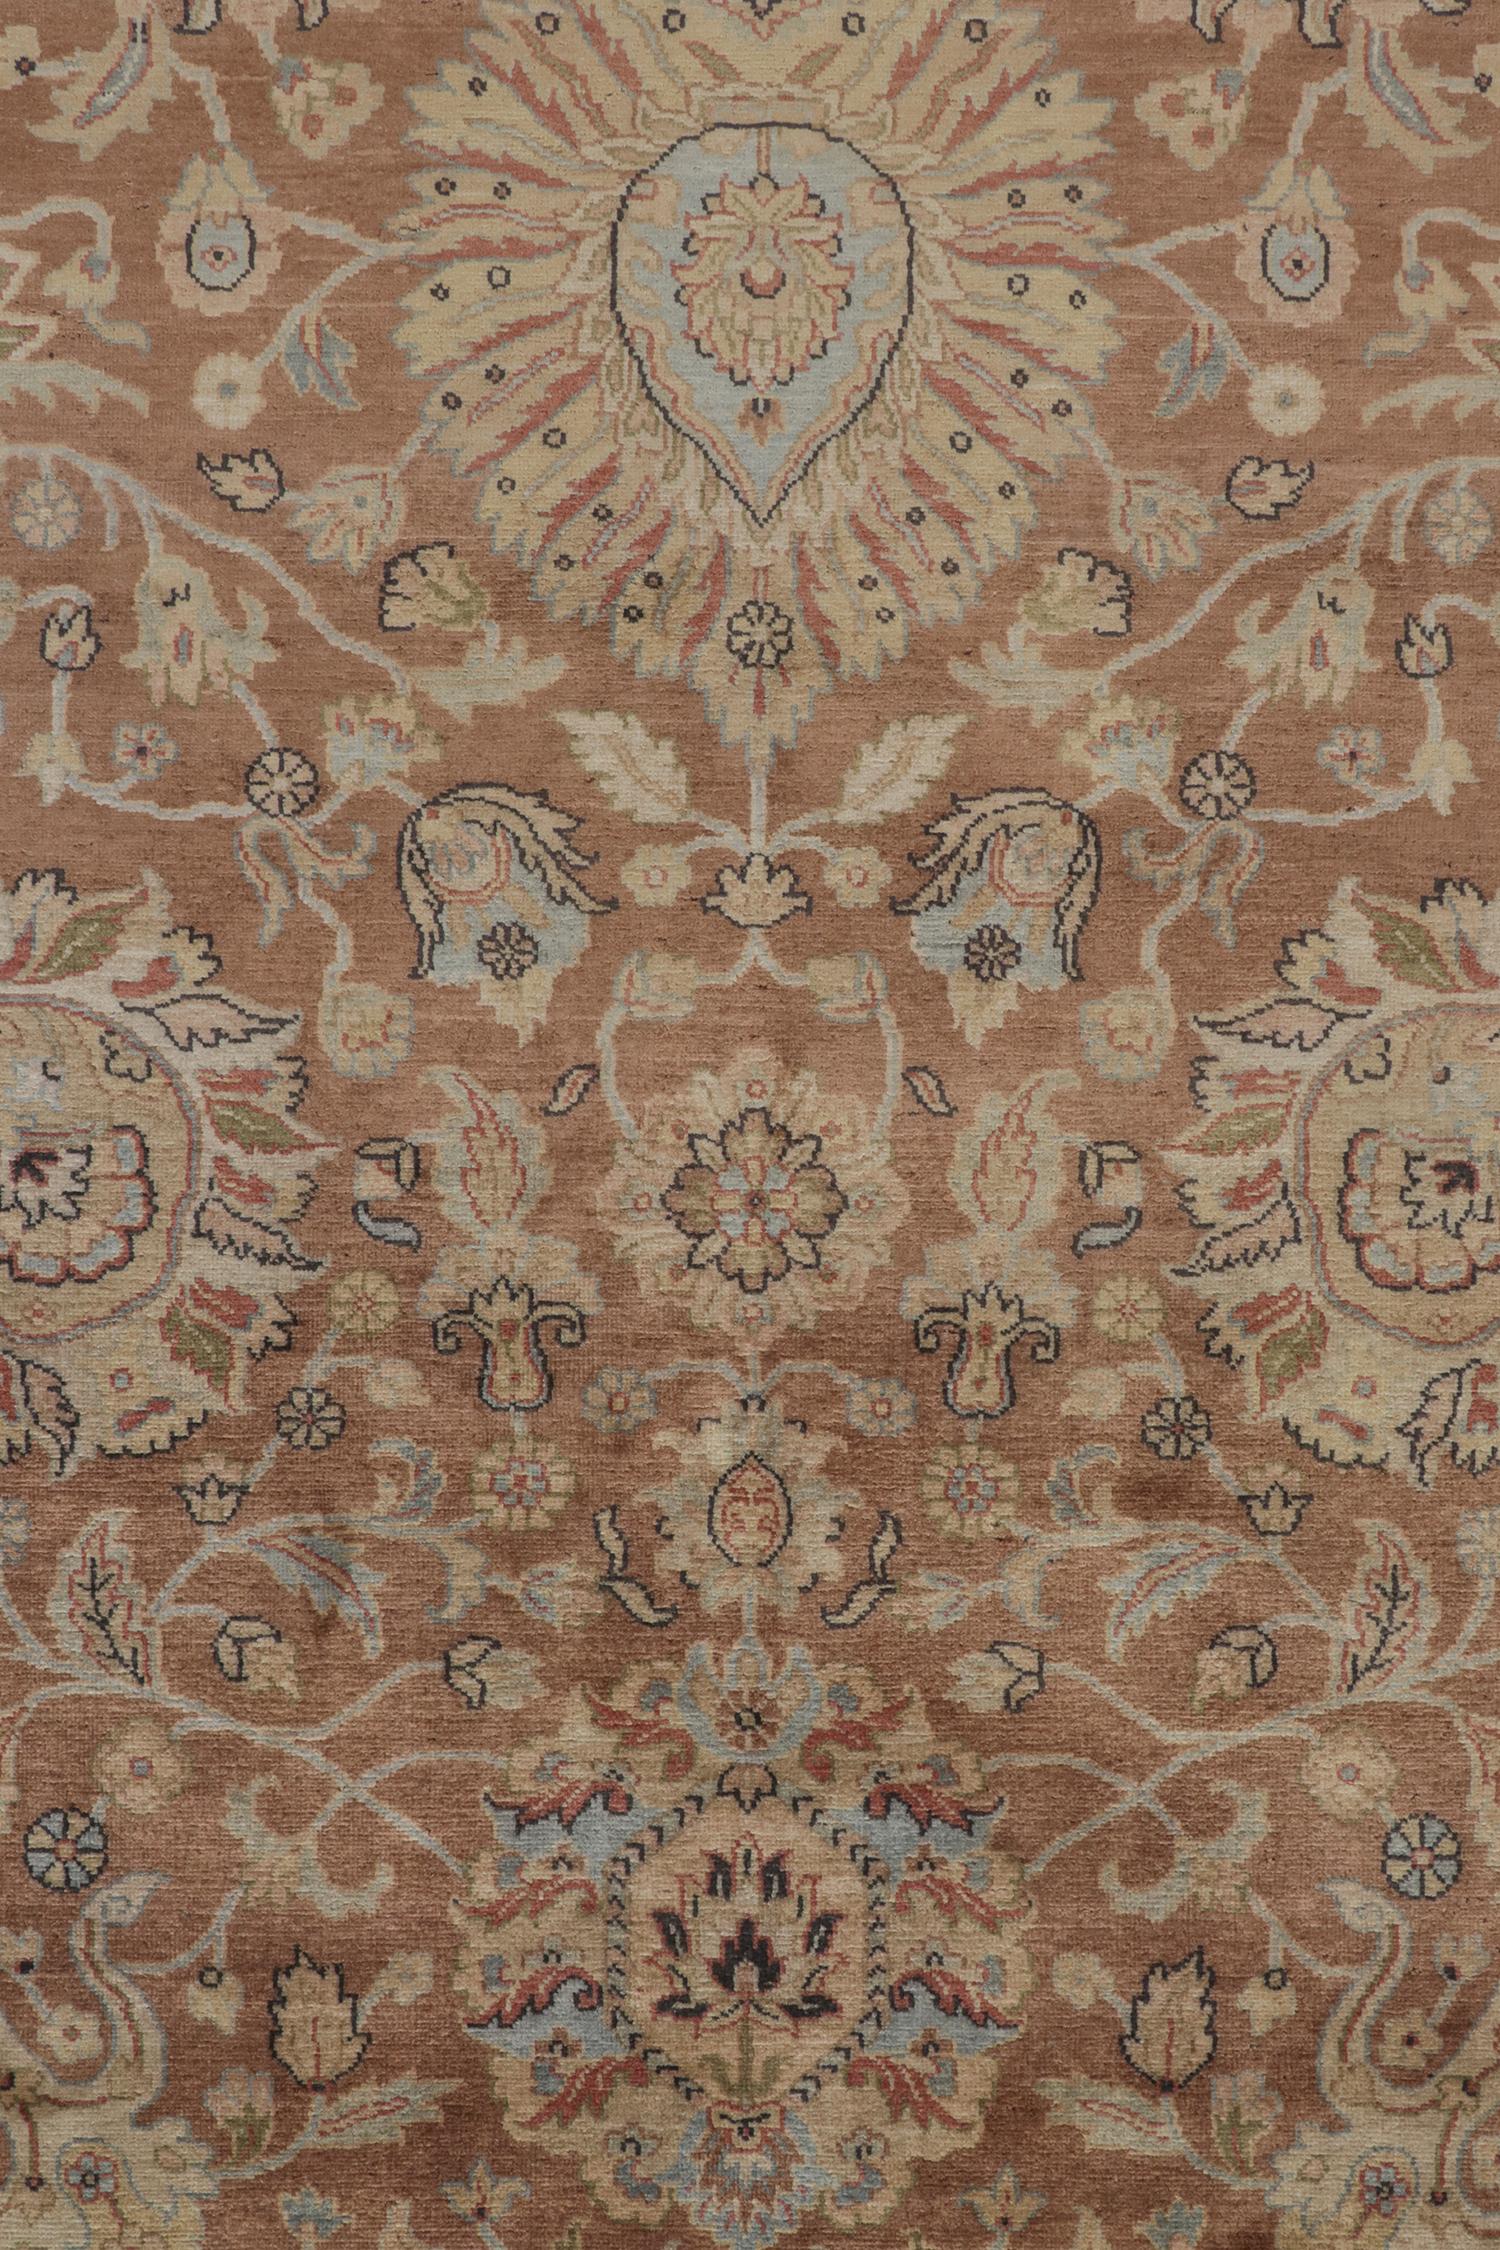 Contemporary Rug & Kilim’s Persian Tabriz Style Rug in Rust, Brown and Blue Floral Pattern For Sale